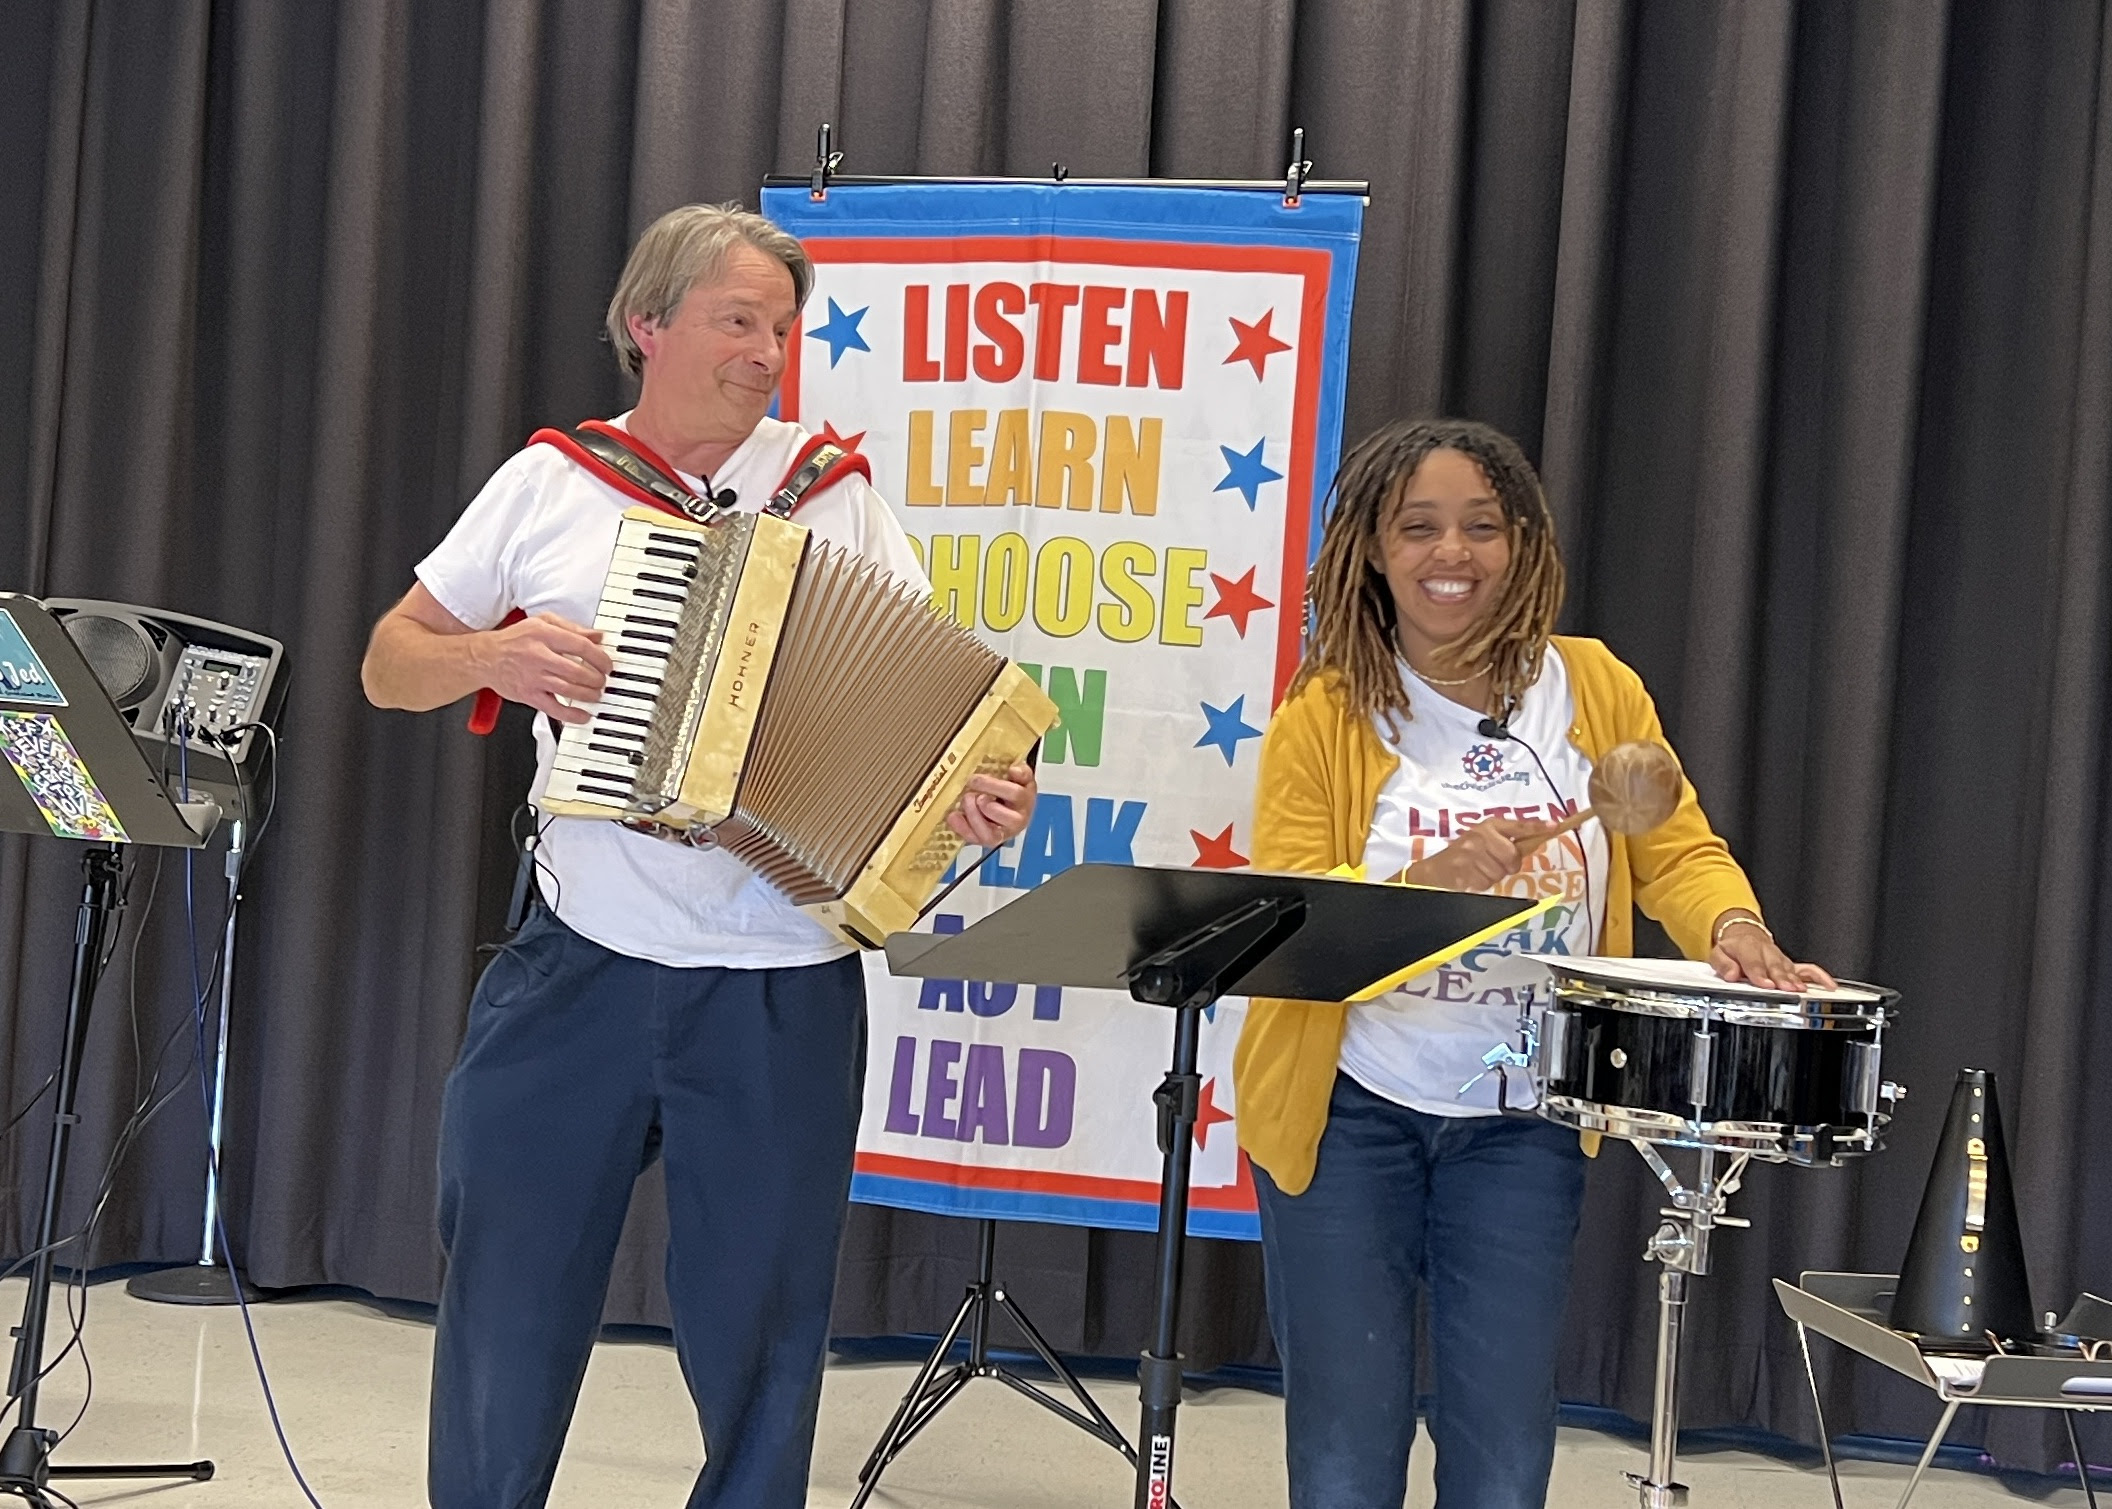 Nick Newlin and Munit Mesfin, smiling and playing musical instruments on stage. Behind them is a colorful poster that lists the seven steps to democracy (Listen, Learn, Choose, Join, Speak, Act, Lead).